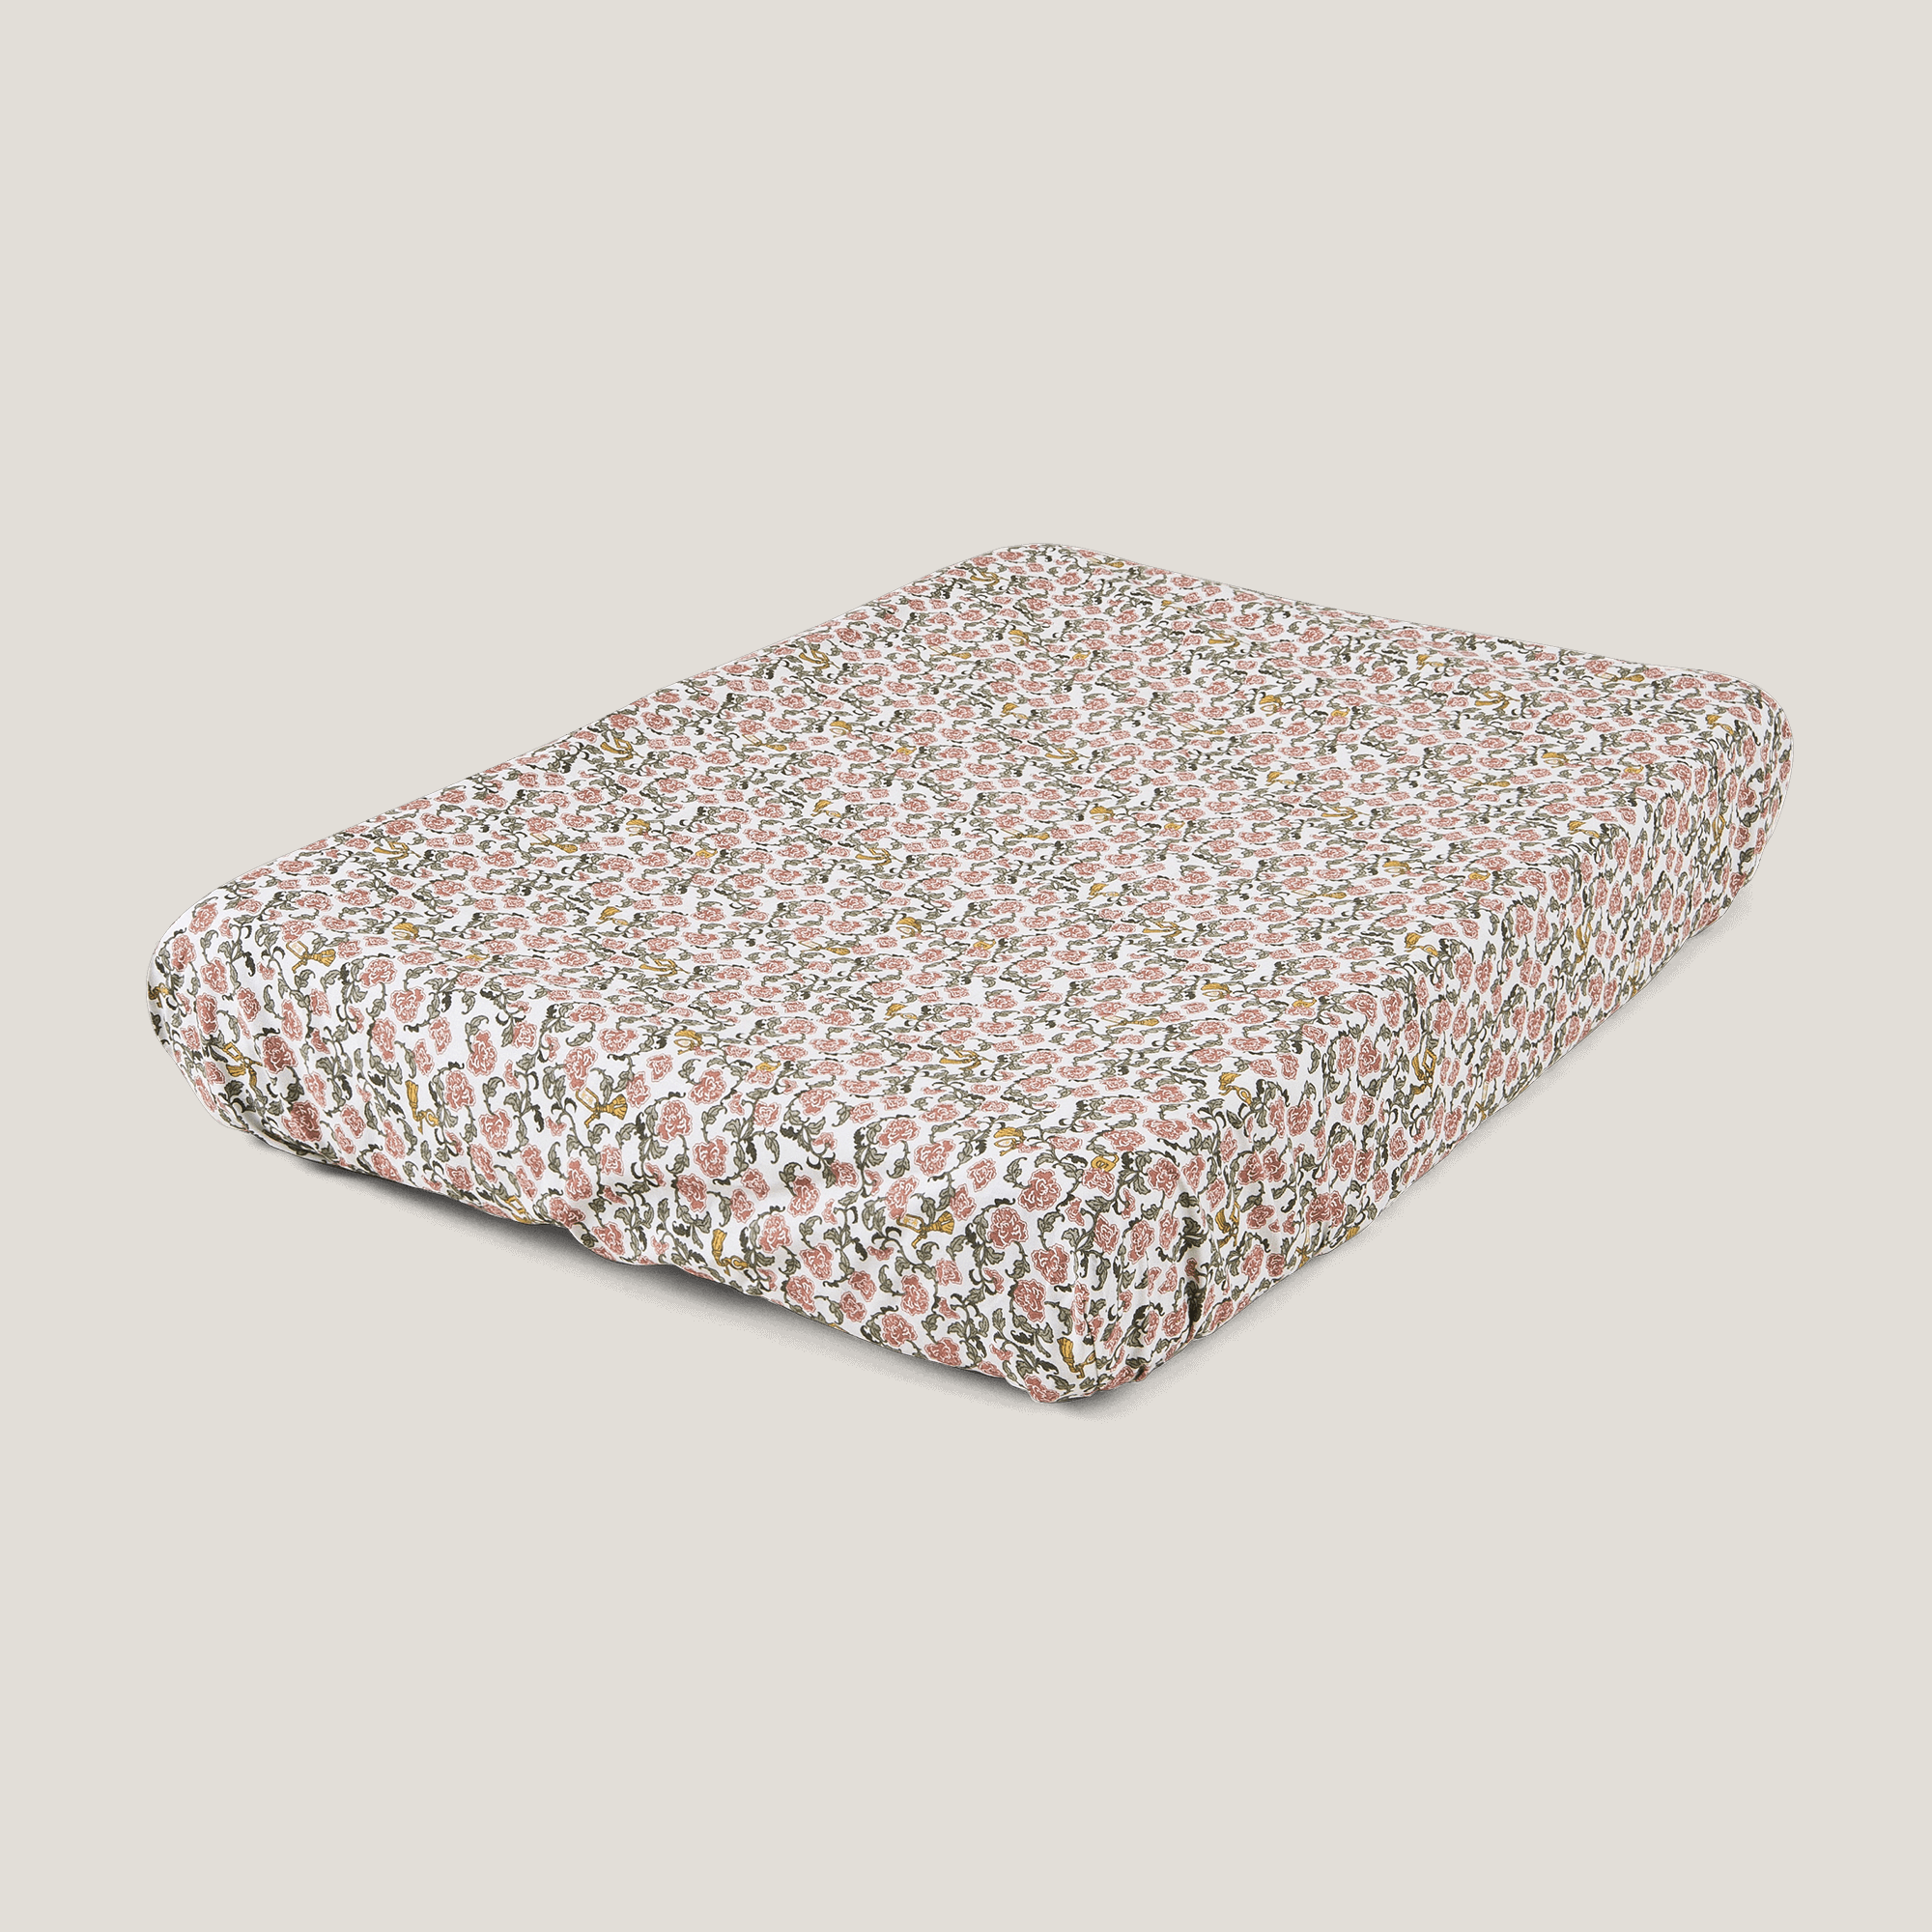 Garbo & Friends Changing mat cover - Percale Floral Vine - Hola BB